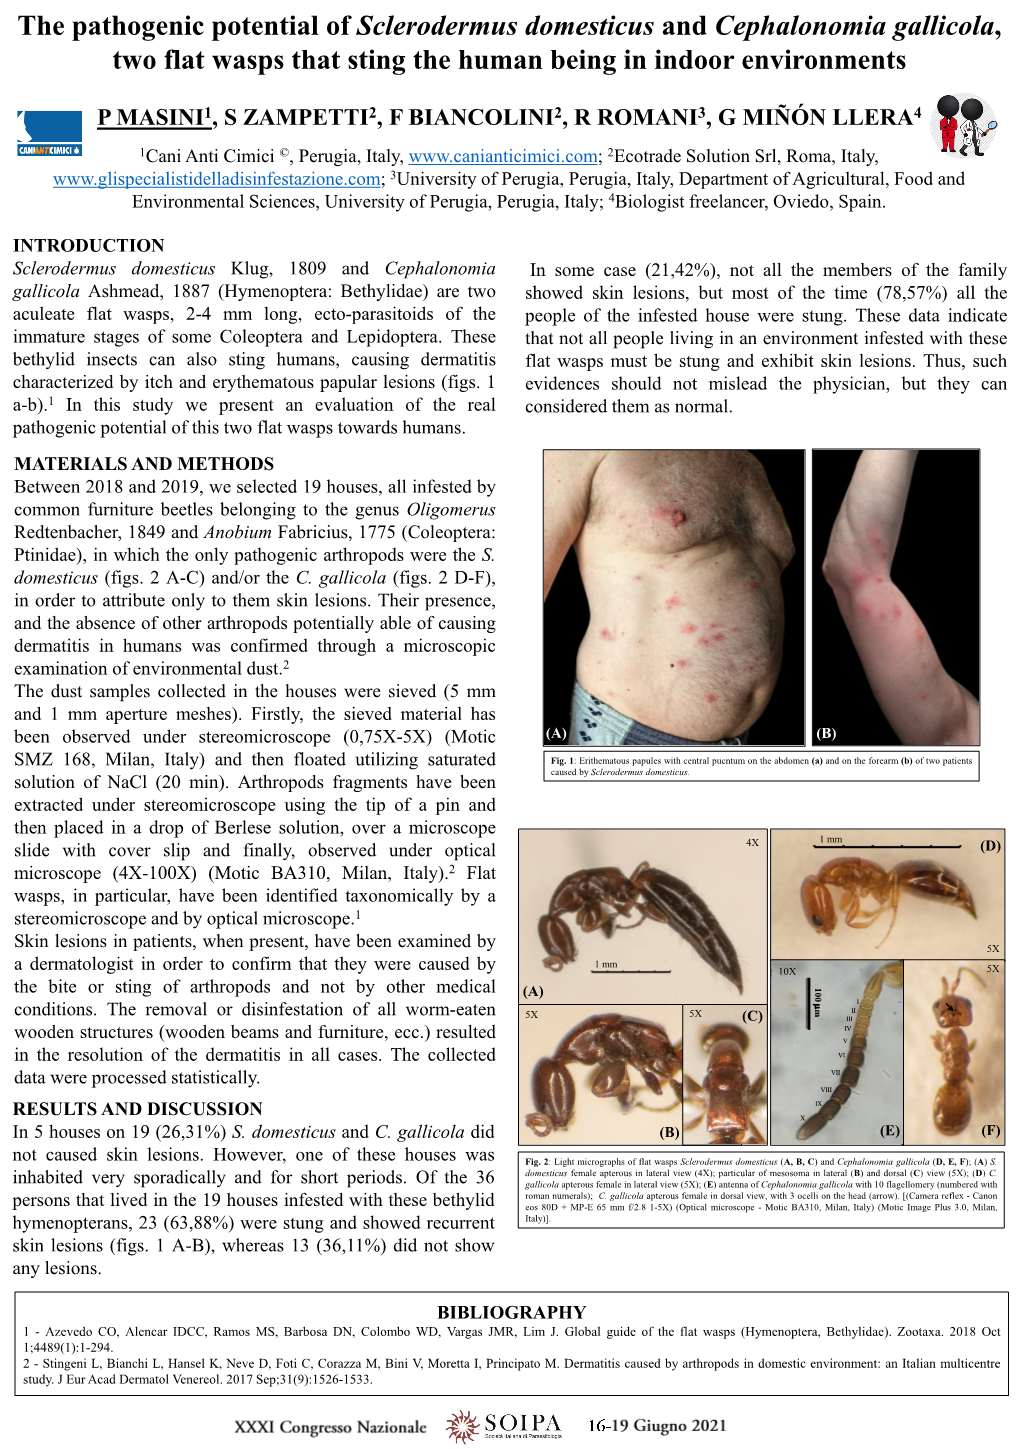 The Pathogenic Potential of Sclerodermus Domesticus and Cephalonomia Gallicola, Two Flat Wasps That Sting the Human Being in Indoor Environments